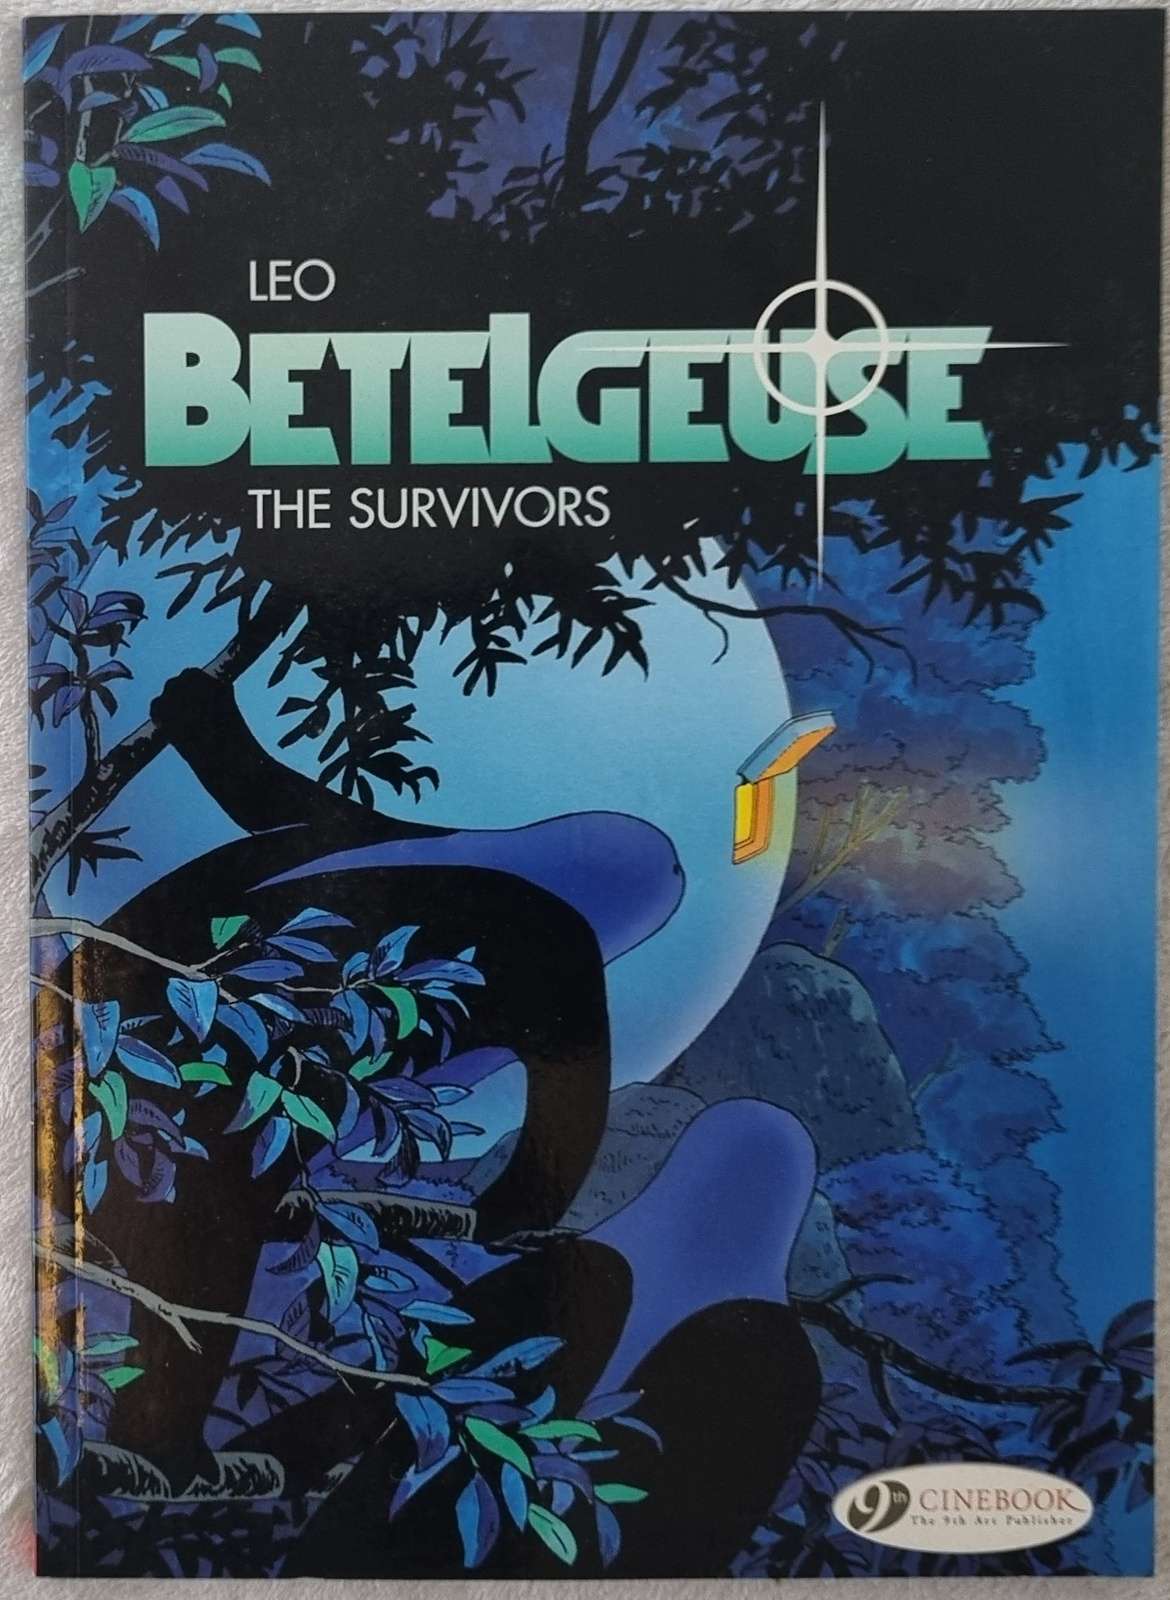 Betelgeuse The Survivors (By Leo)